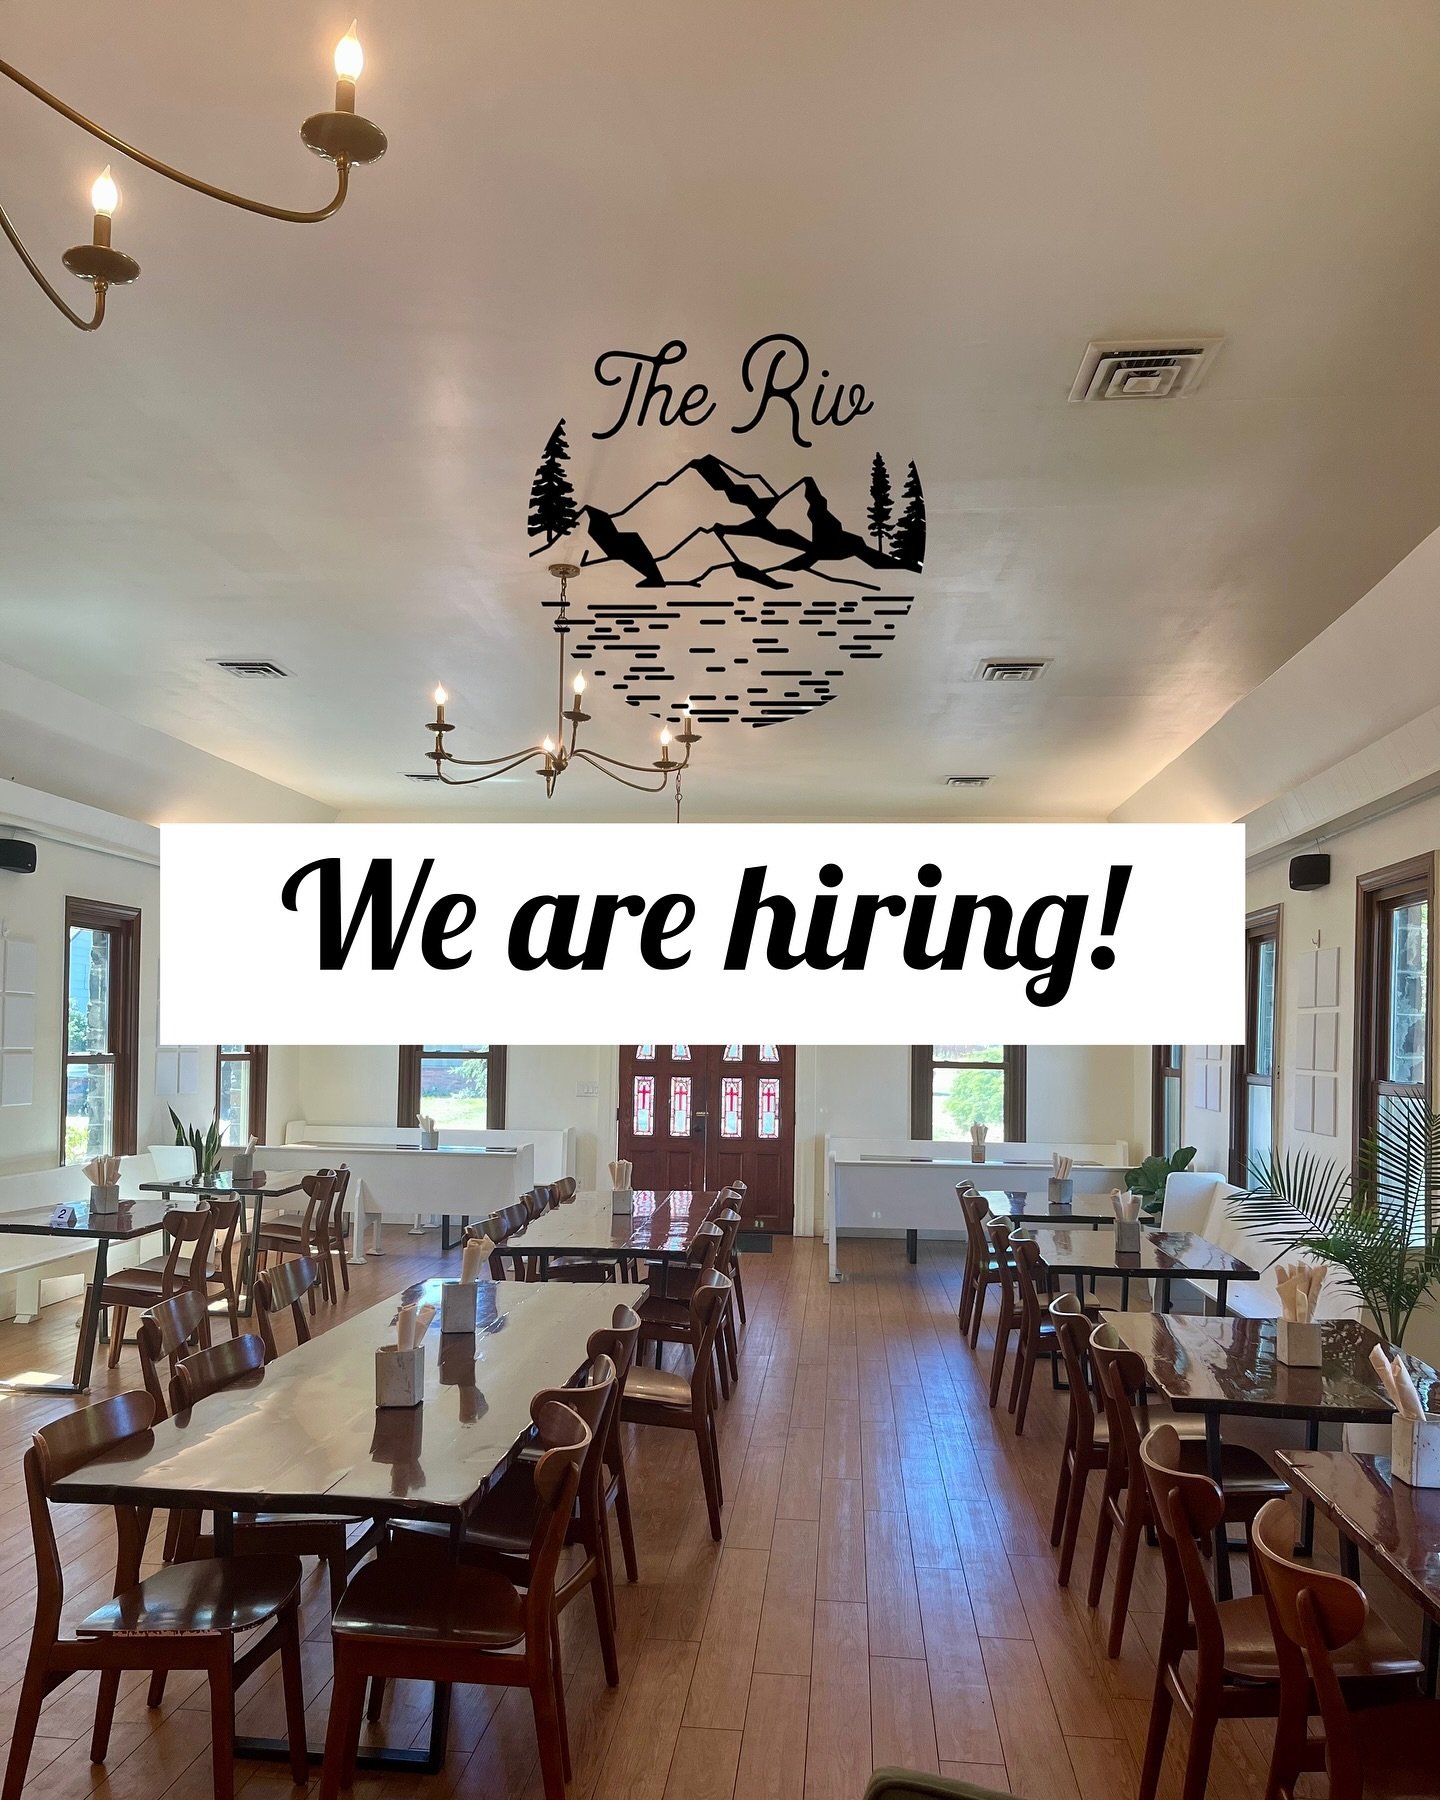 The Riv is hiring! 

BOH - Line Cook Position 
Friday-Tuesday, 30hrs per week 

Hourly pay plus tips! 

Interested? Shoot us a message on social media or email us at therivcafe@gmail.com. You can even drop your resume off to us at the cafe if interes